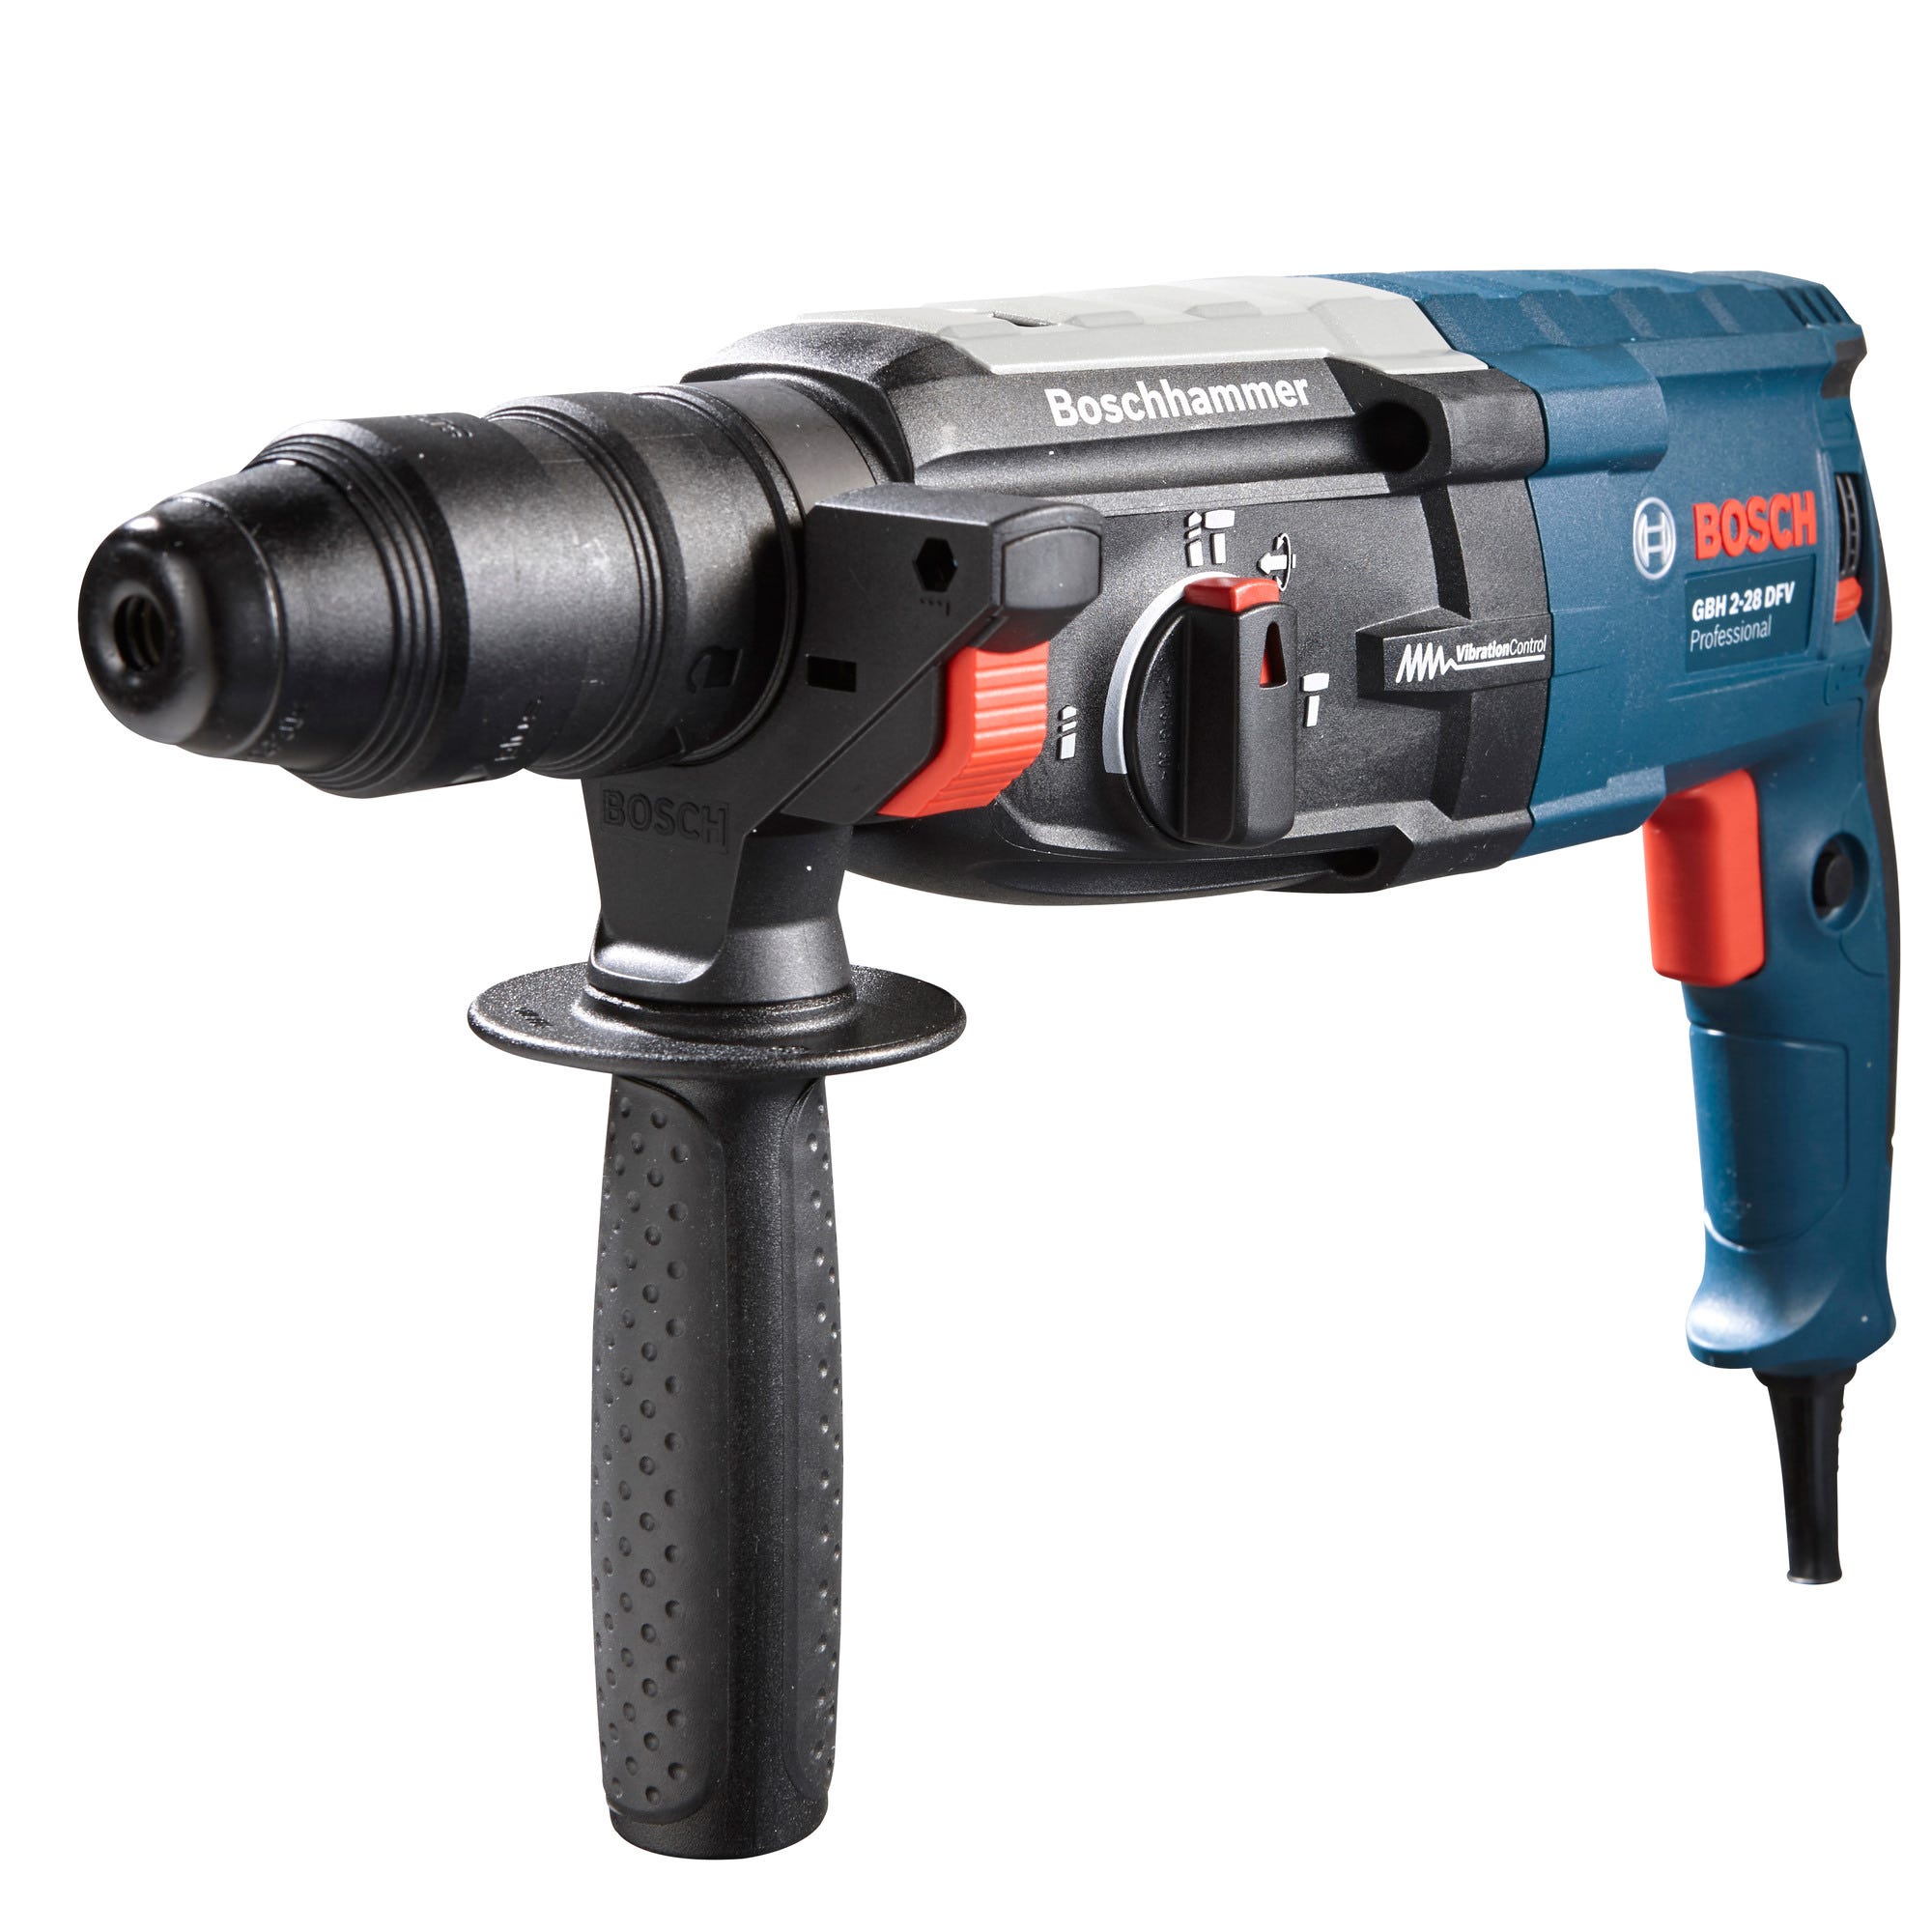 Perforateur burineur filaire 850 W - BOSCH PROFESSIONAL GBH 2-28 F 0